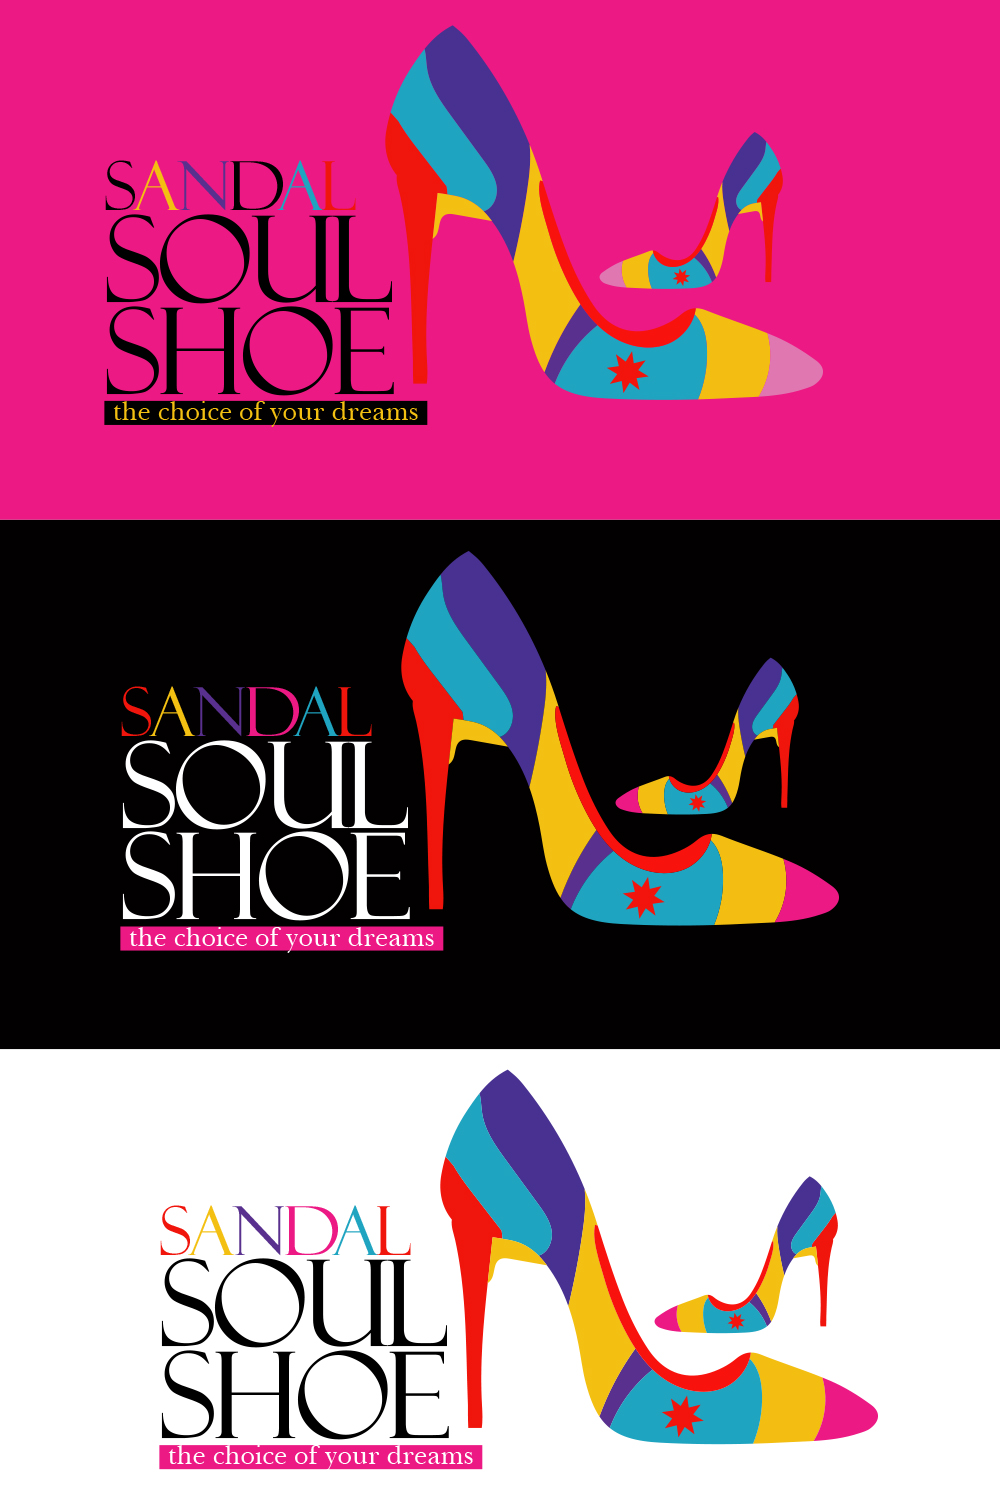 Business logo (Sandal Soul Shoe) with all formats - Only$10 pinterest preview image.